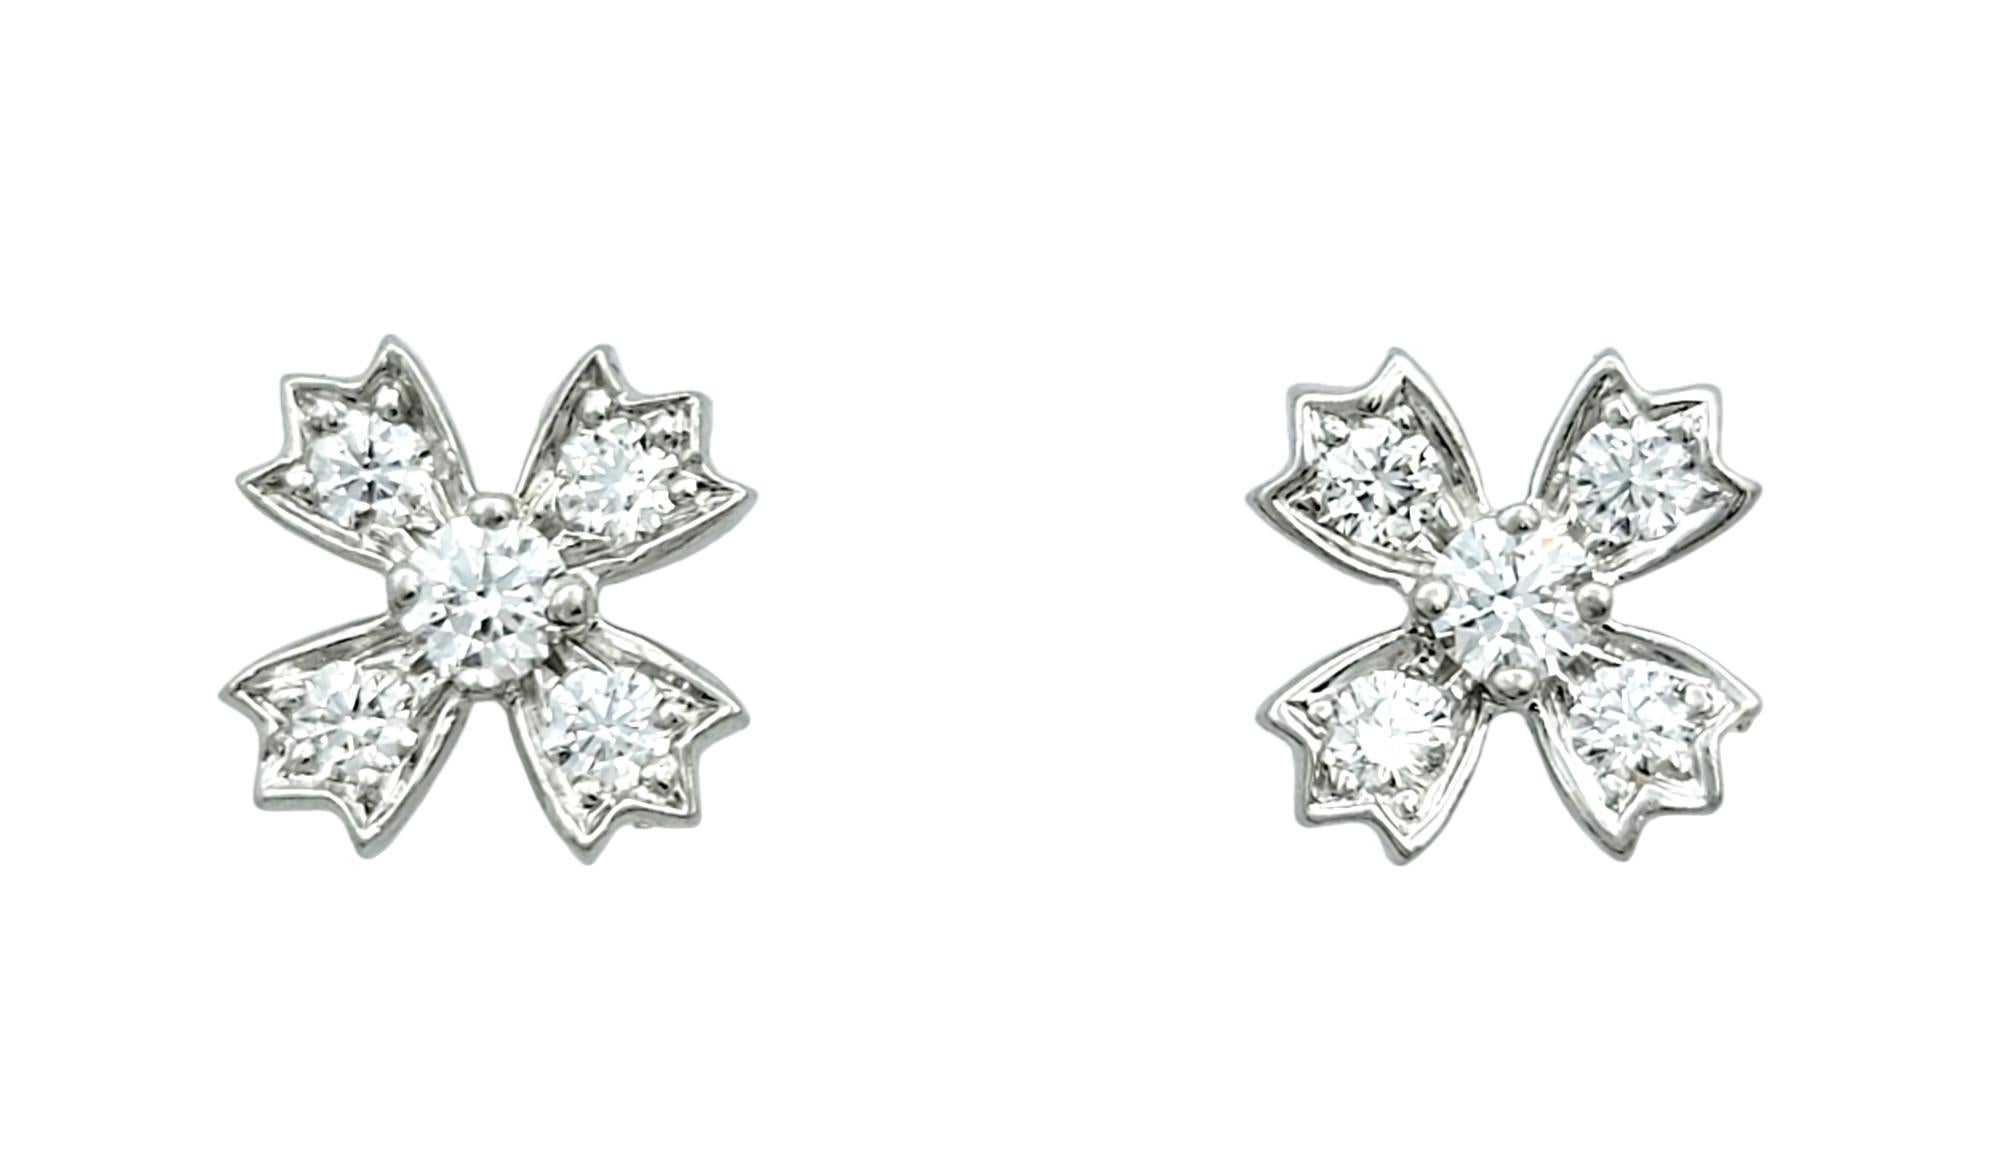 These exquisite stud earrings, crafted in platinum and hailing from the renowned Tiffany & Co., epitomize timeless elegance with a touch of wintry enchantment. The delicate snowflake motif gracing each earring is a testament to both intricate design